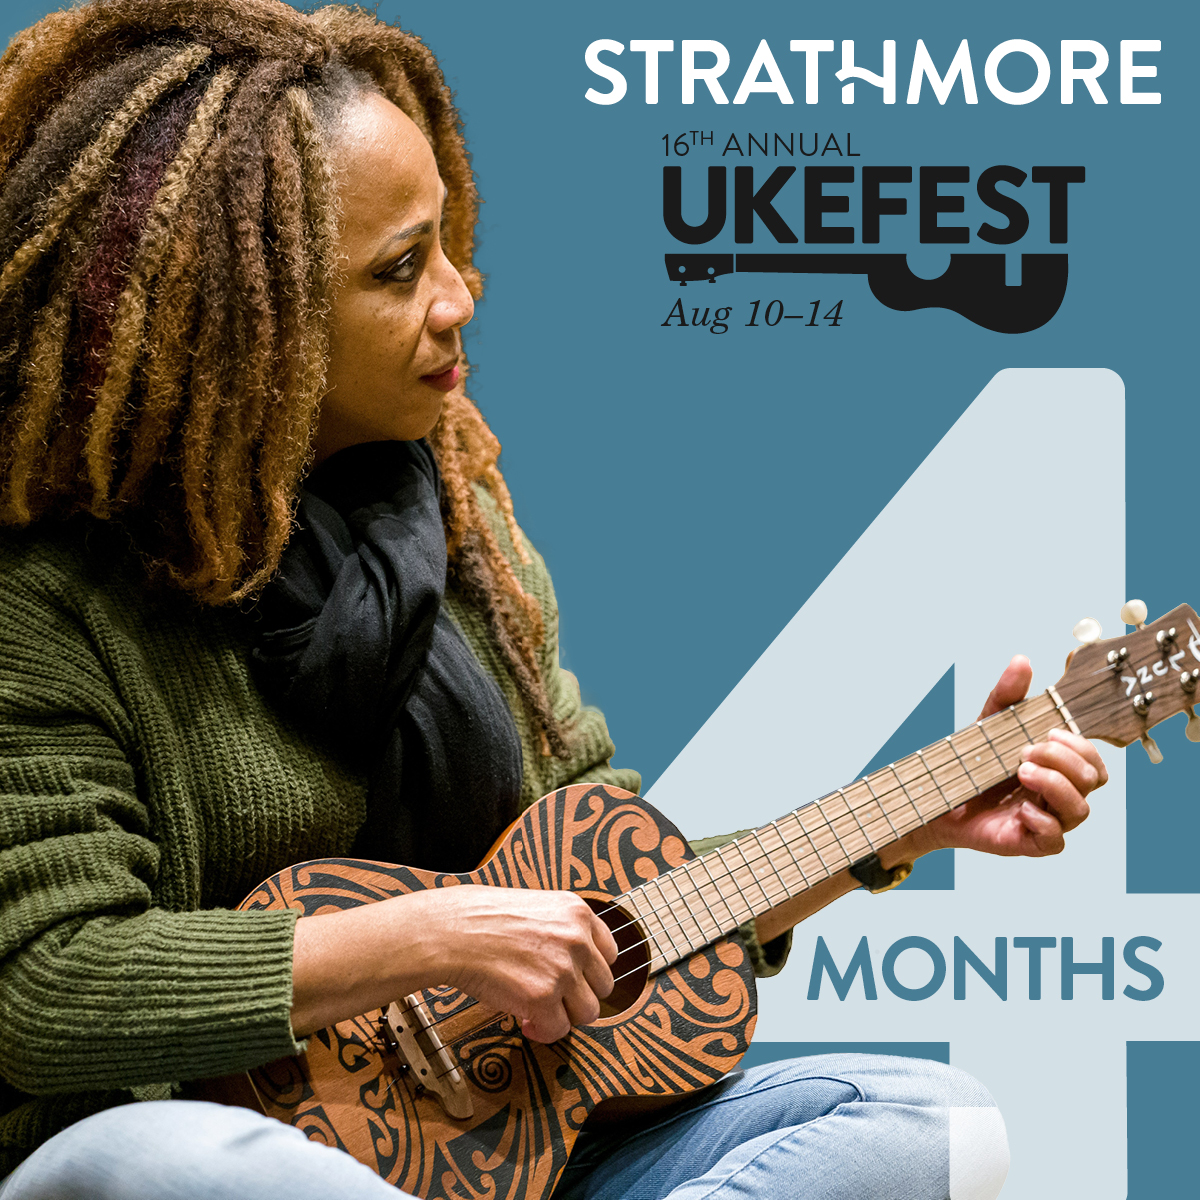 IS IT SUMMER YET? 
#StrathmoreUkeFest Register by May 13 to save! Strathmore.org/UkeFest